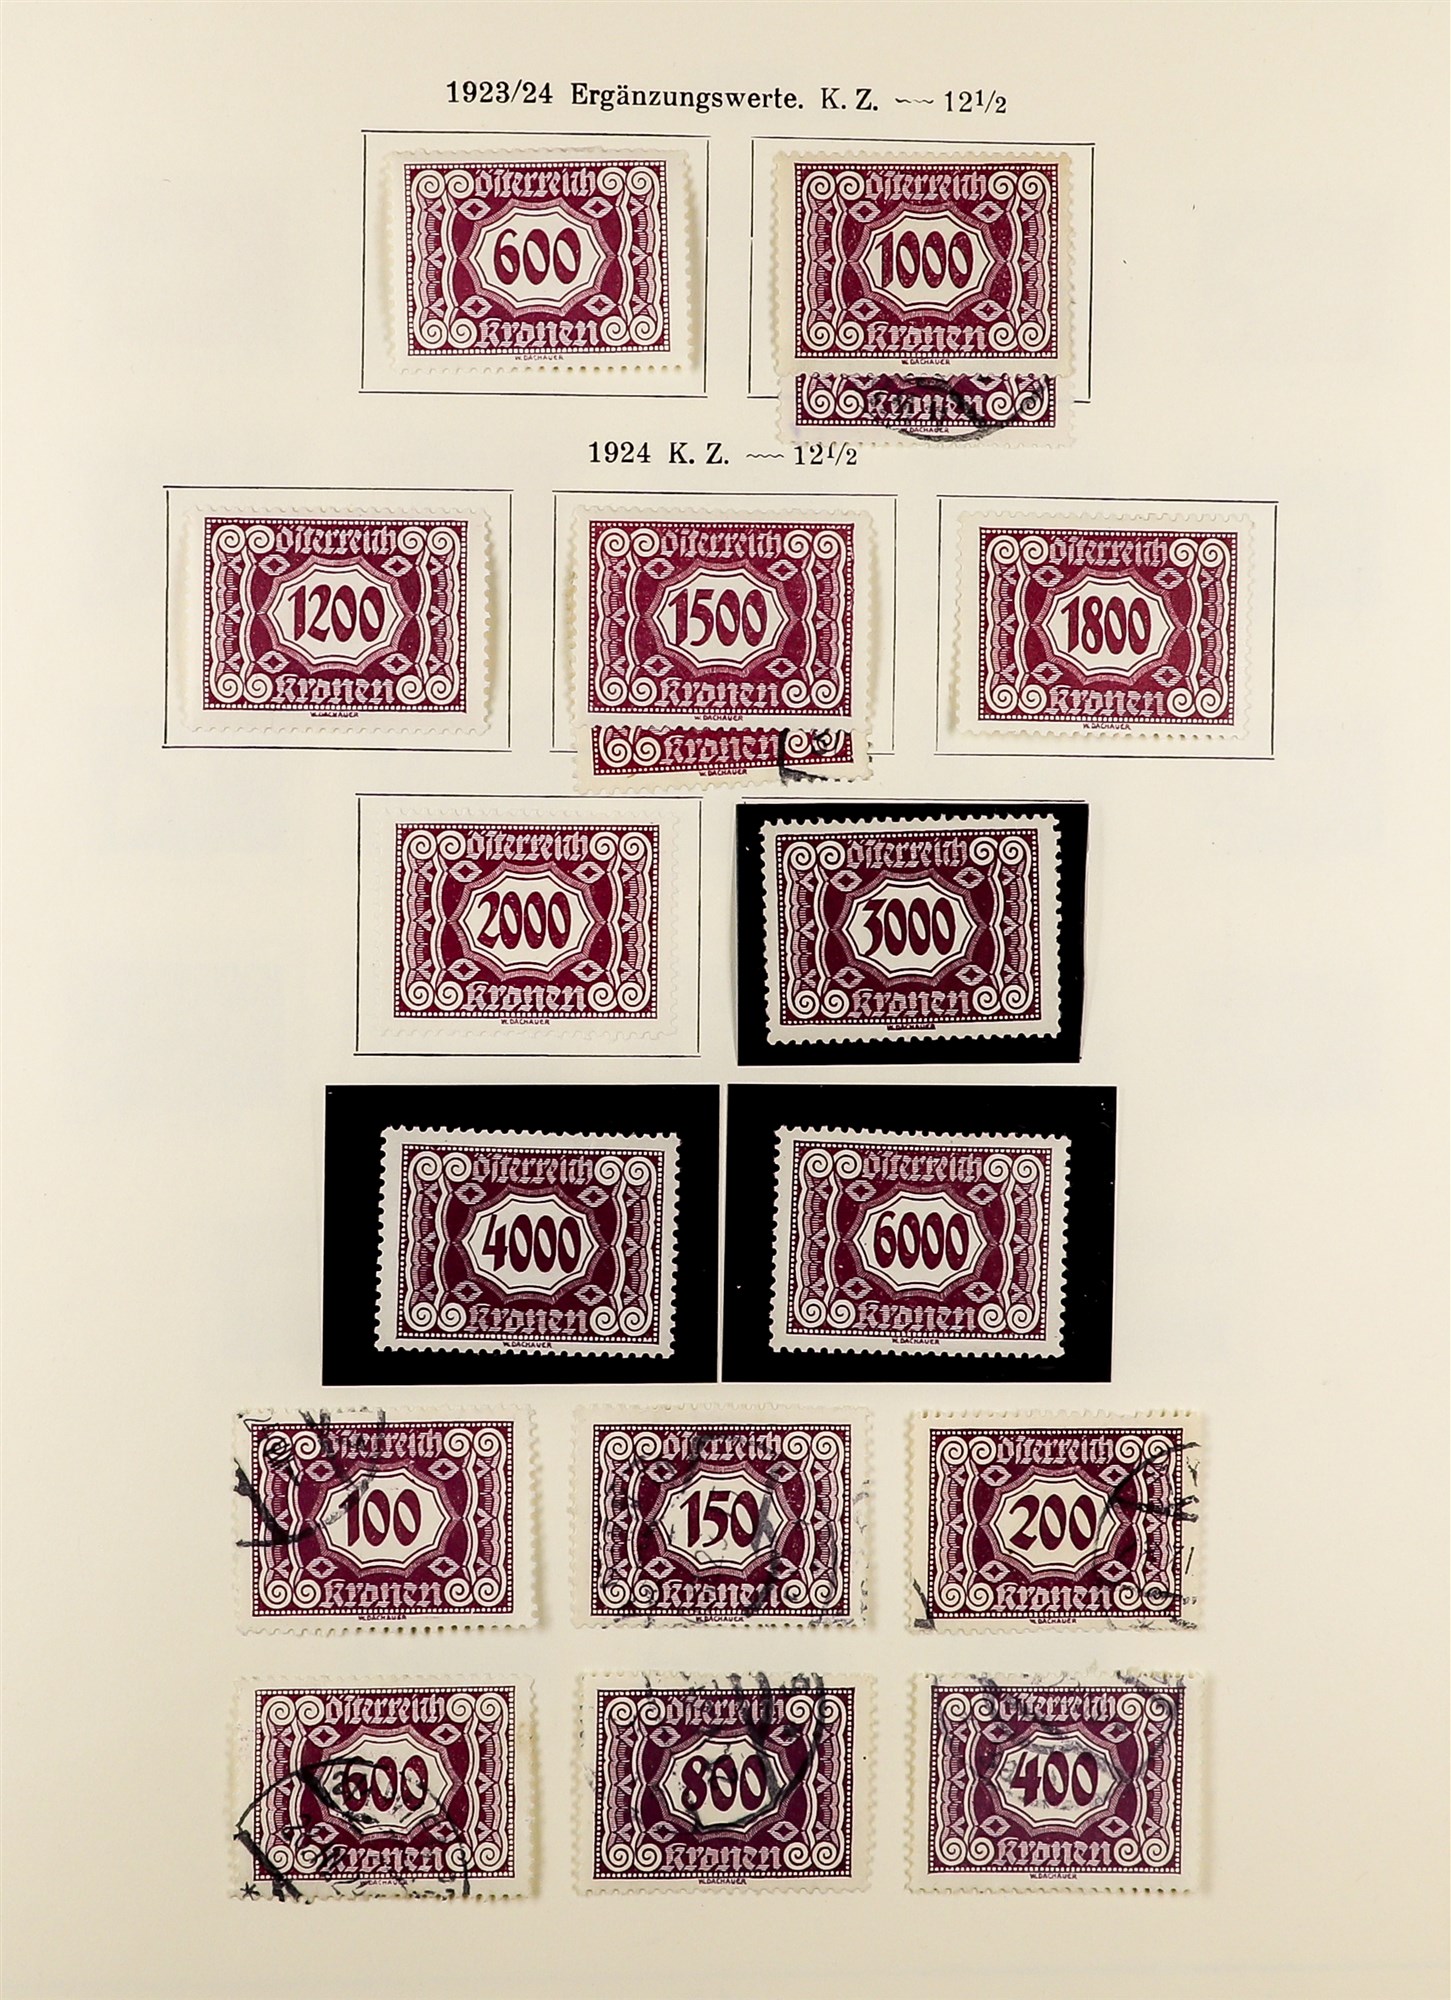 AUSTRIA 1918 - 1937 REPUBLIC COLLECTION of chiefly mint / never hinged mint sets in album incl - Image 12 of 22